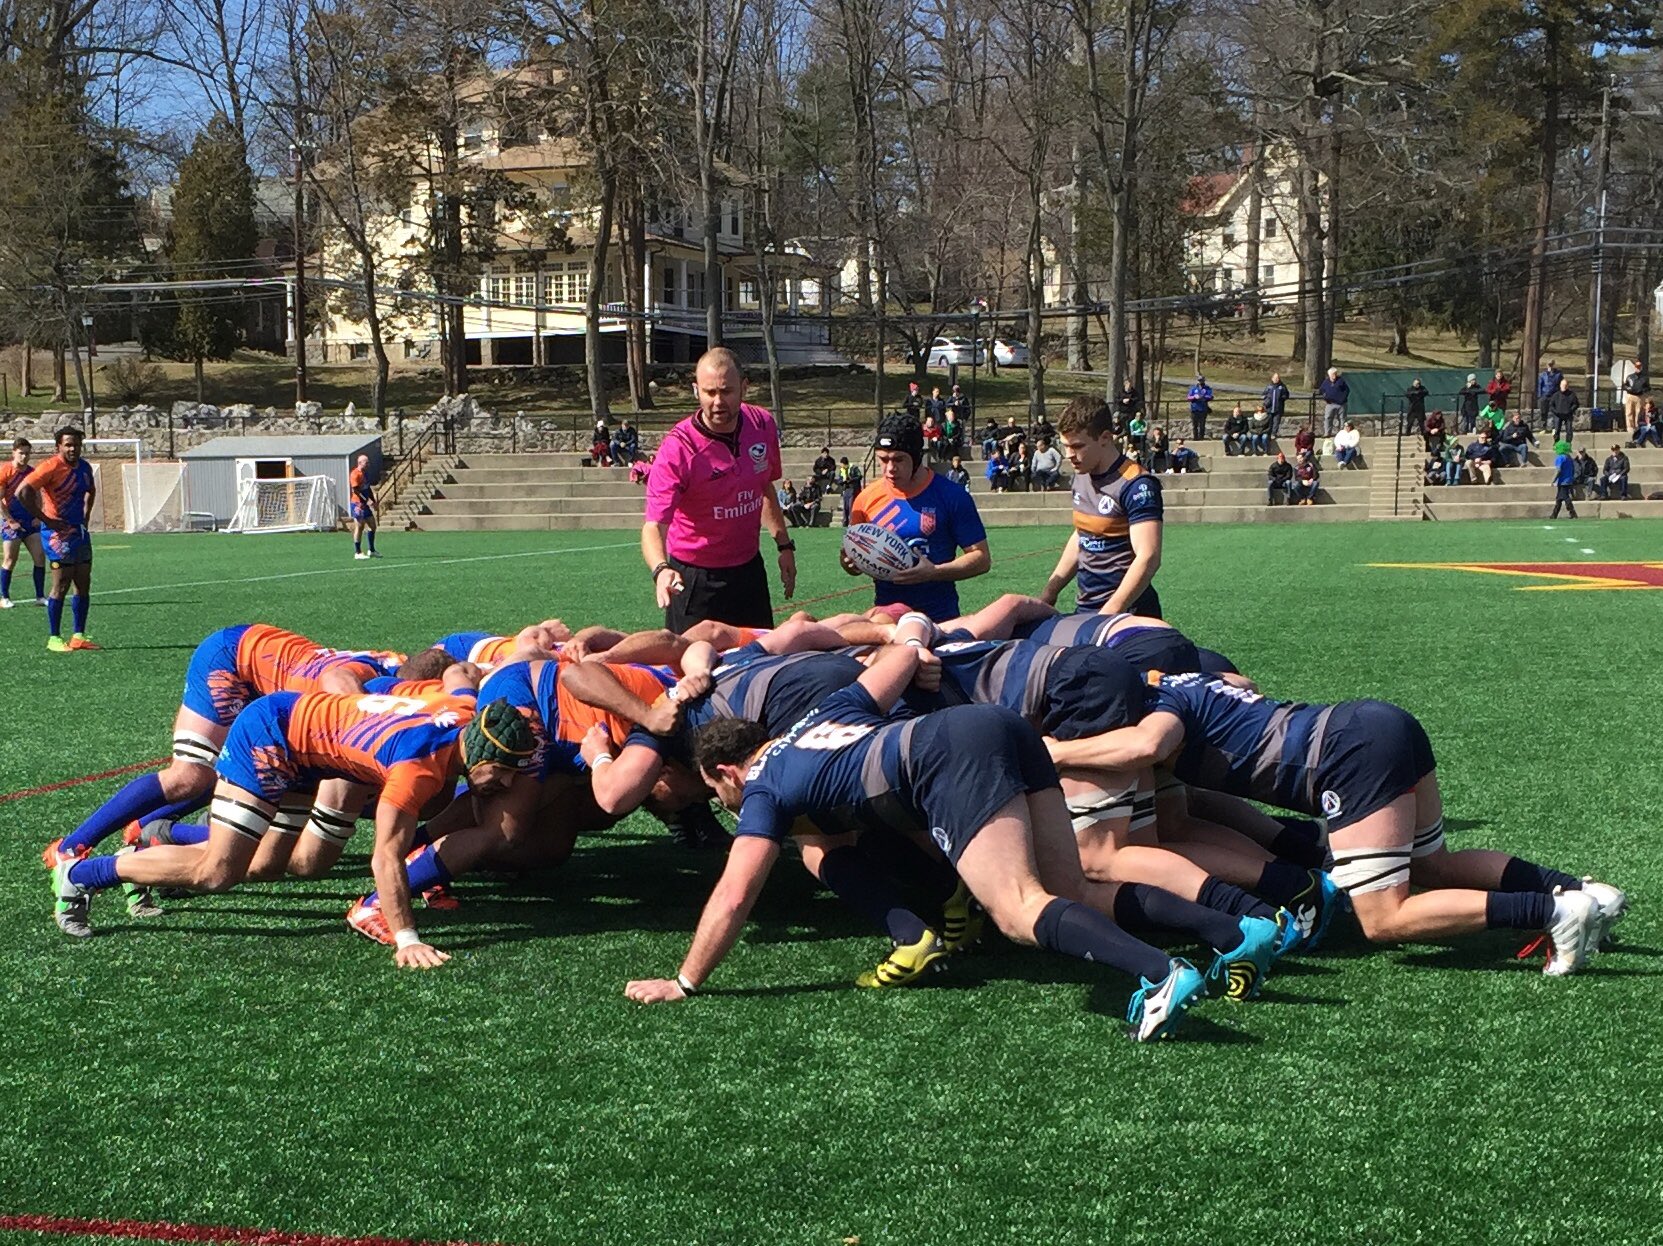 MATCH REPORT: Arrows Fall to MLR Associate Club Rugby United New York